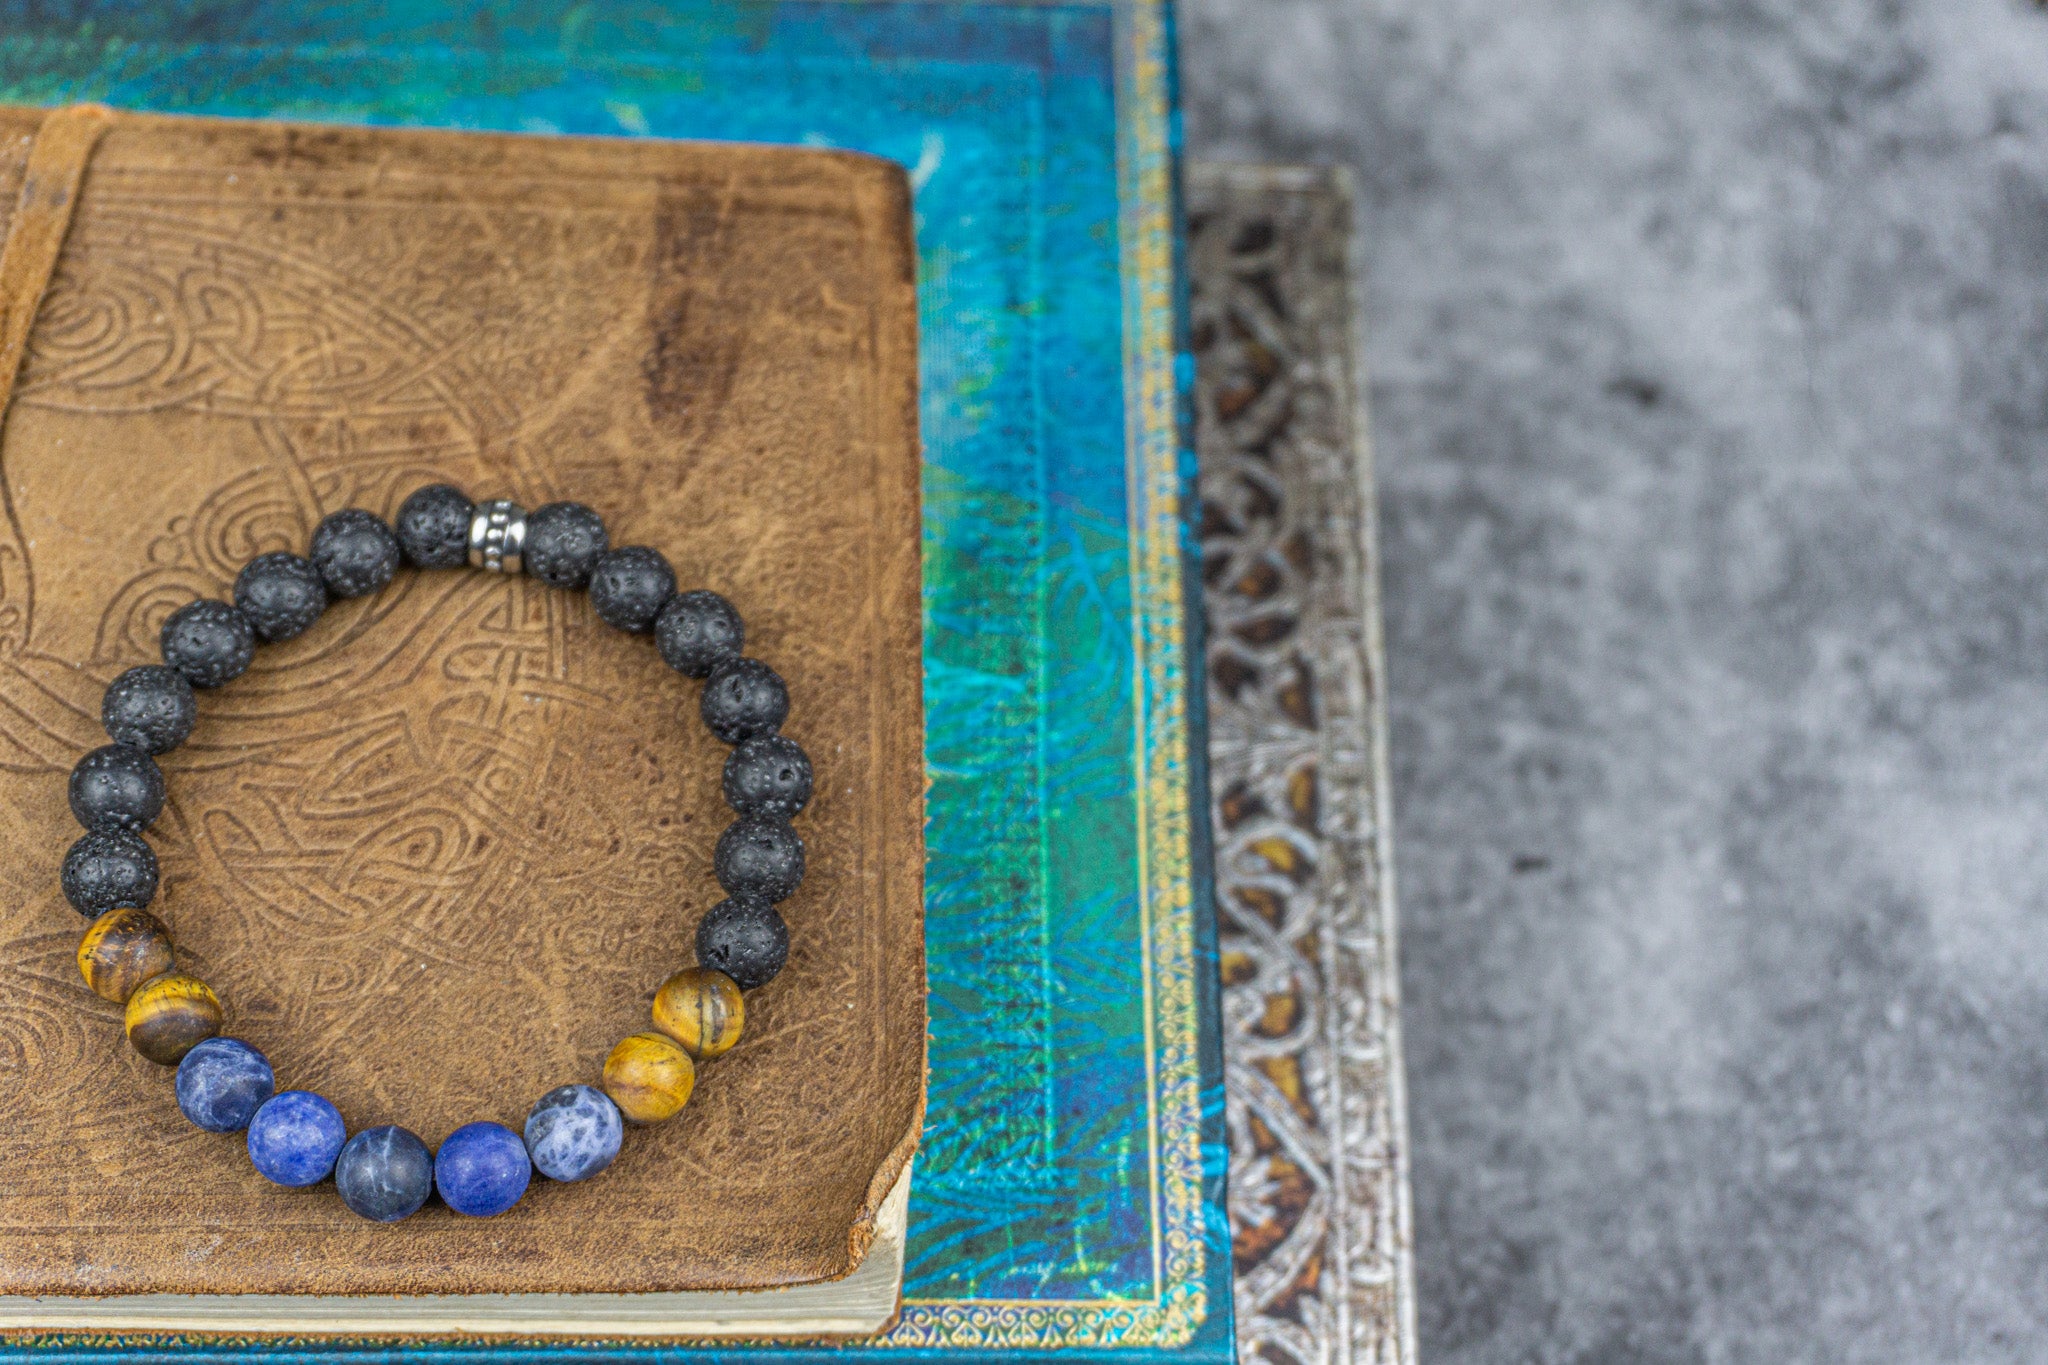 bracelet made of lava stone tiger eye sodalite, on a pile of books